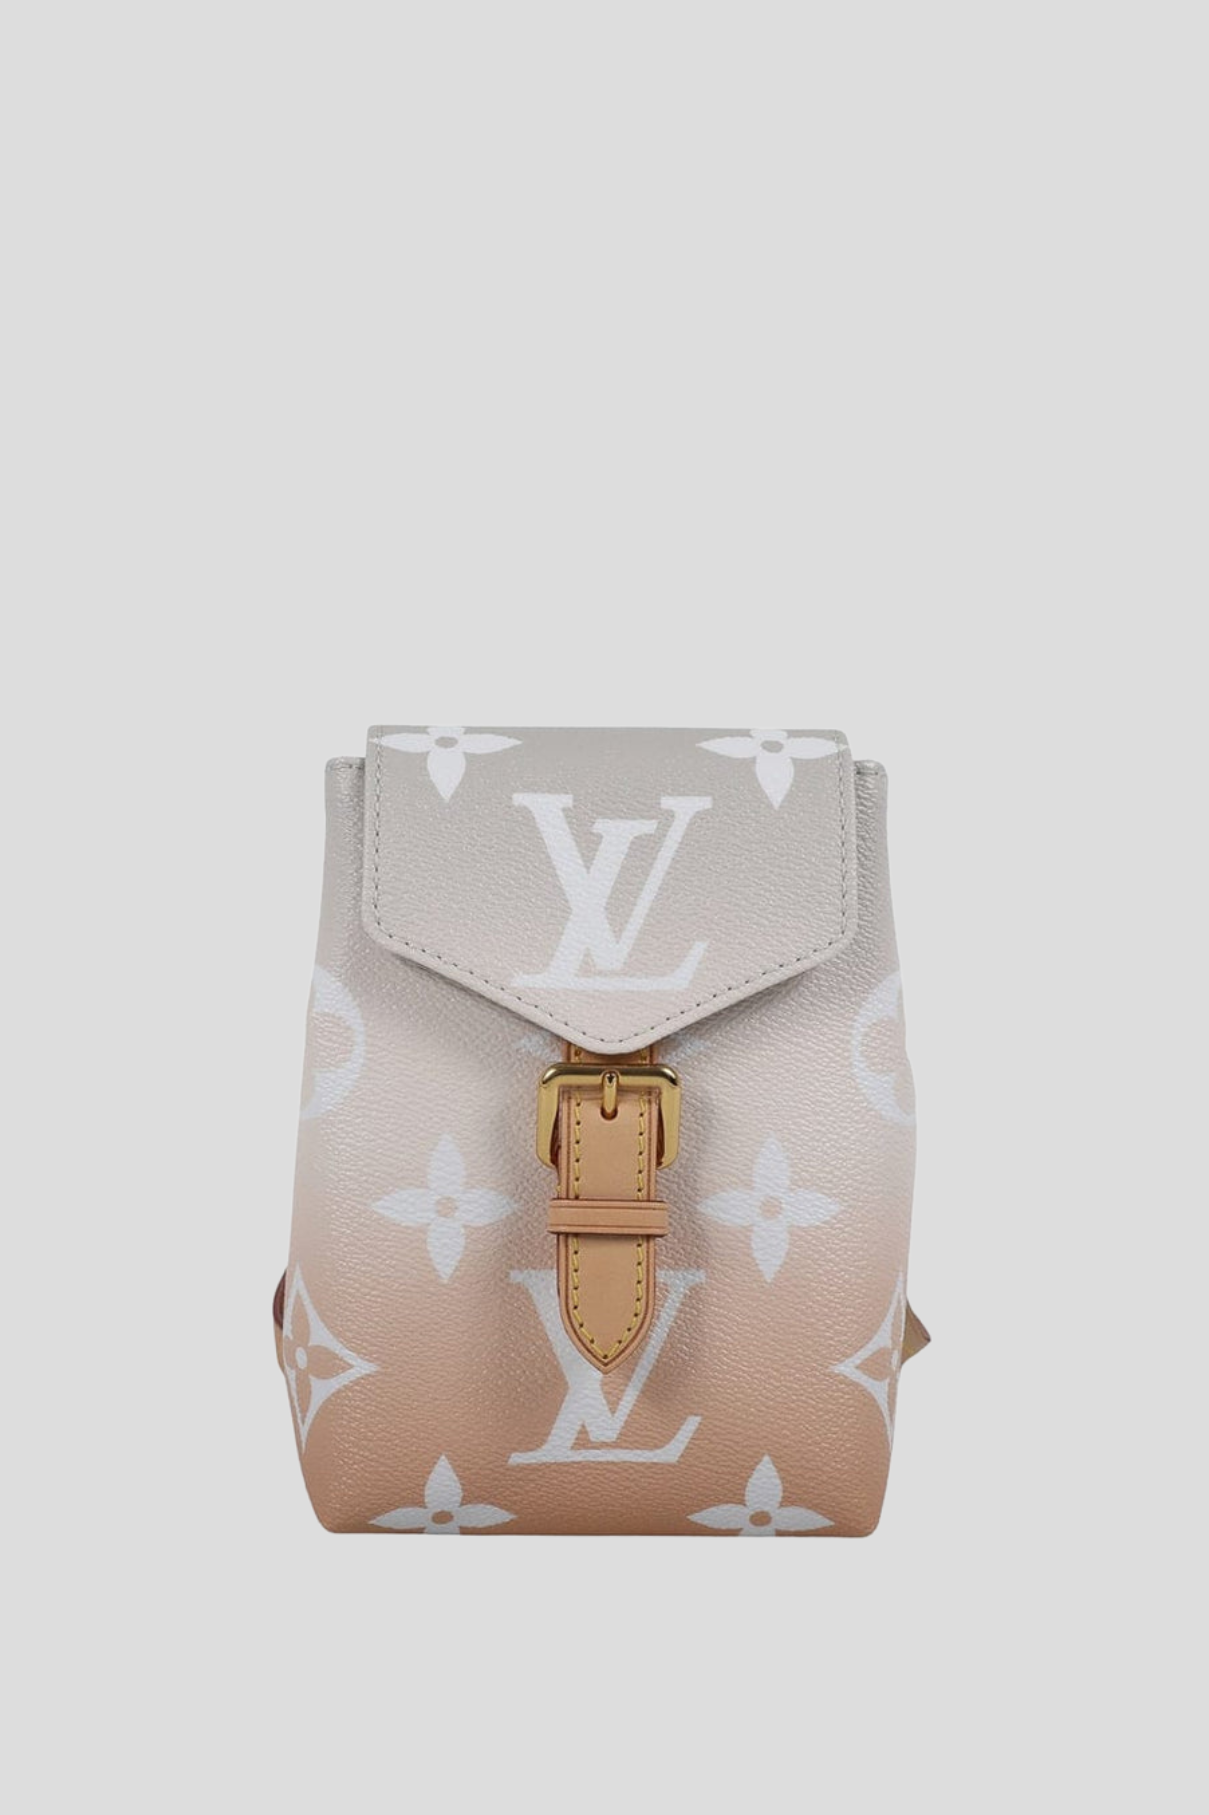 The Louis Vuitton Speedy Bandouliere 25 Mist By The Pool Bag is a